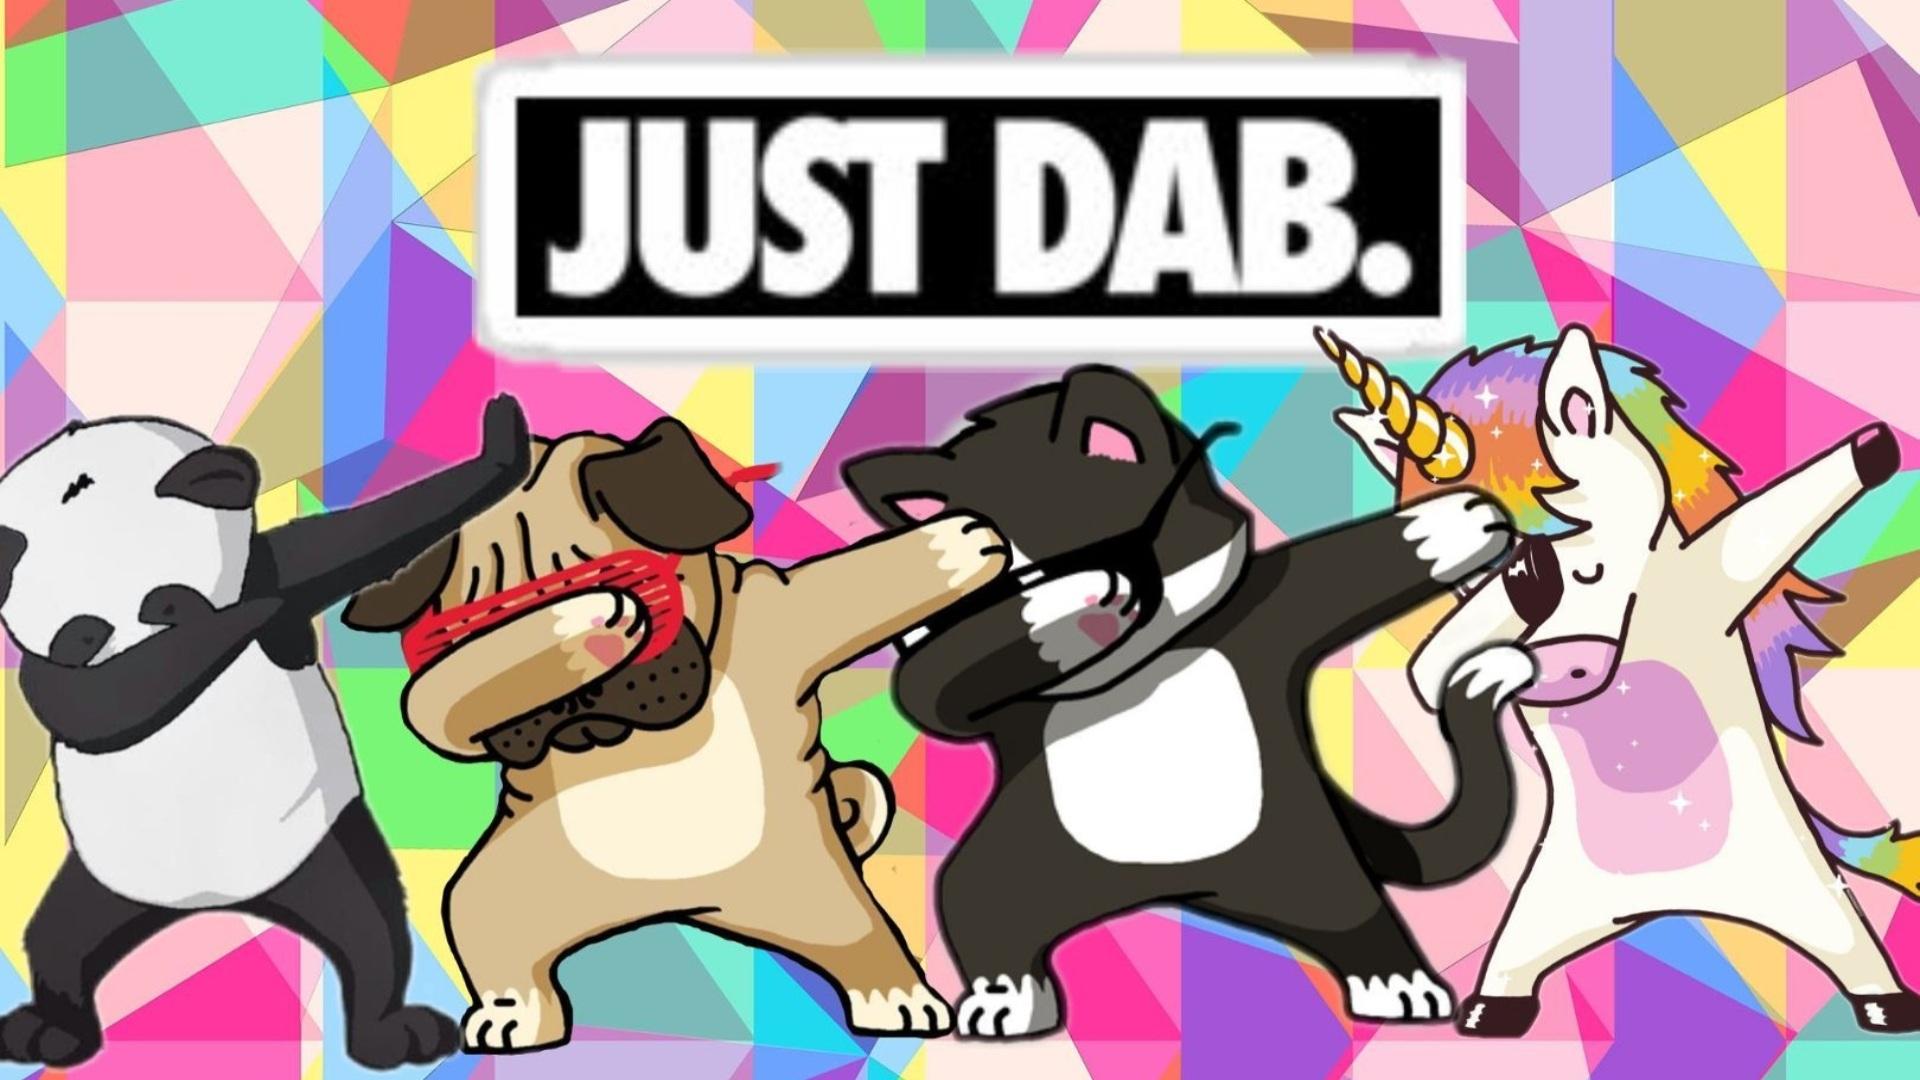 Dab Meme Wallpaper & What Does Dabbing Actually Mean